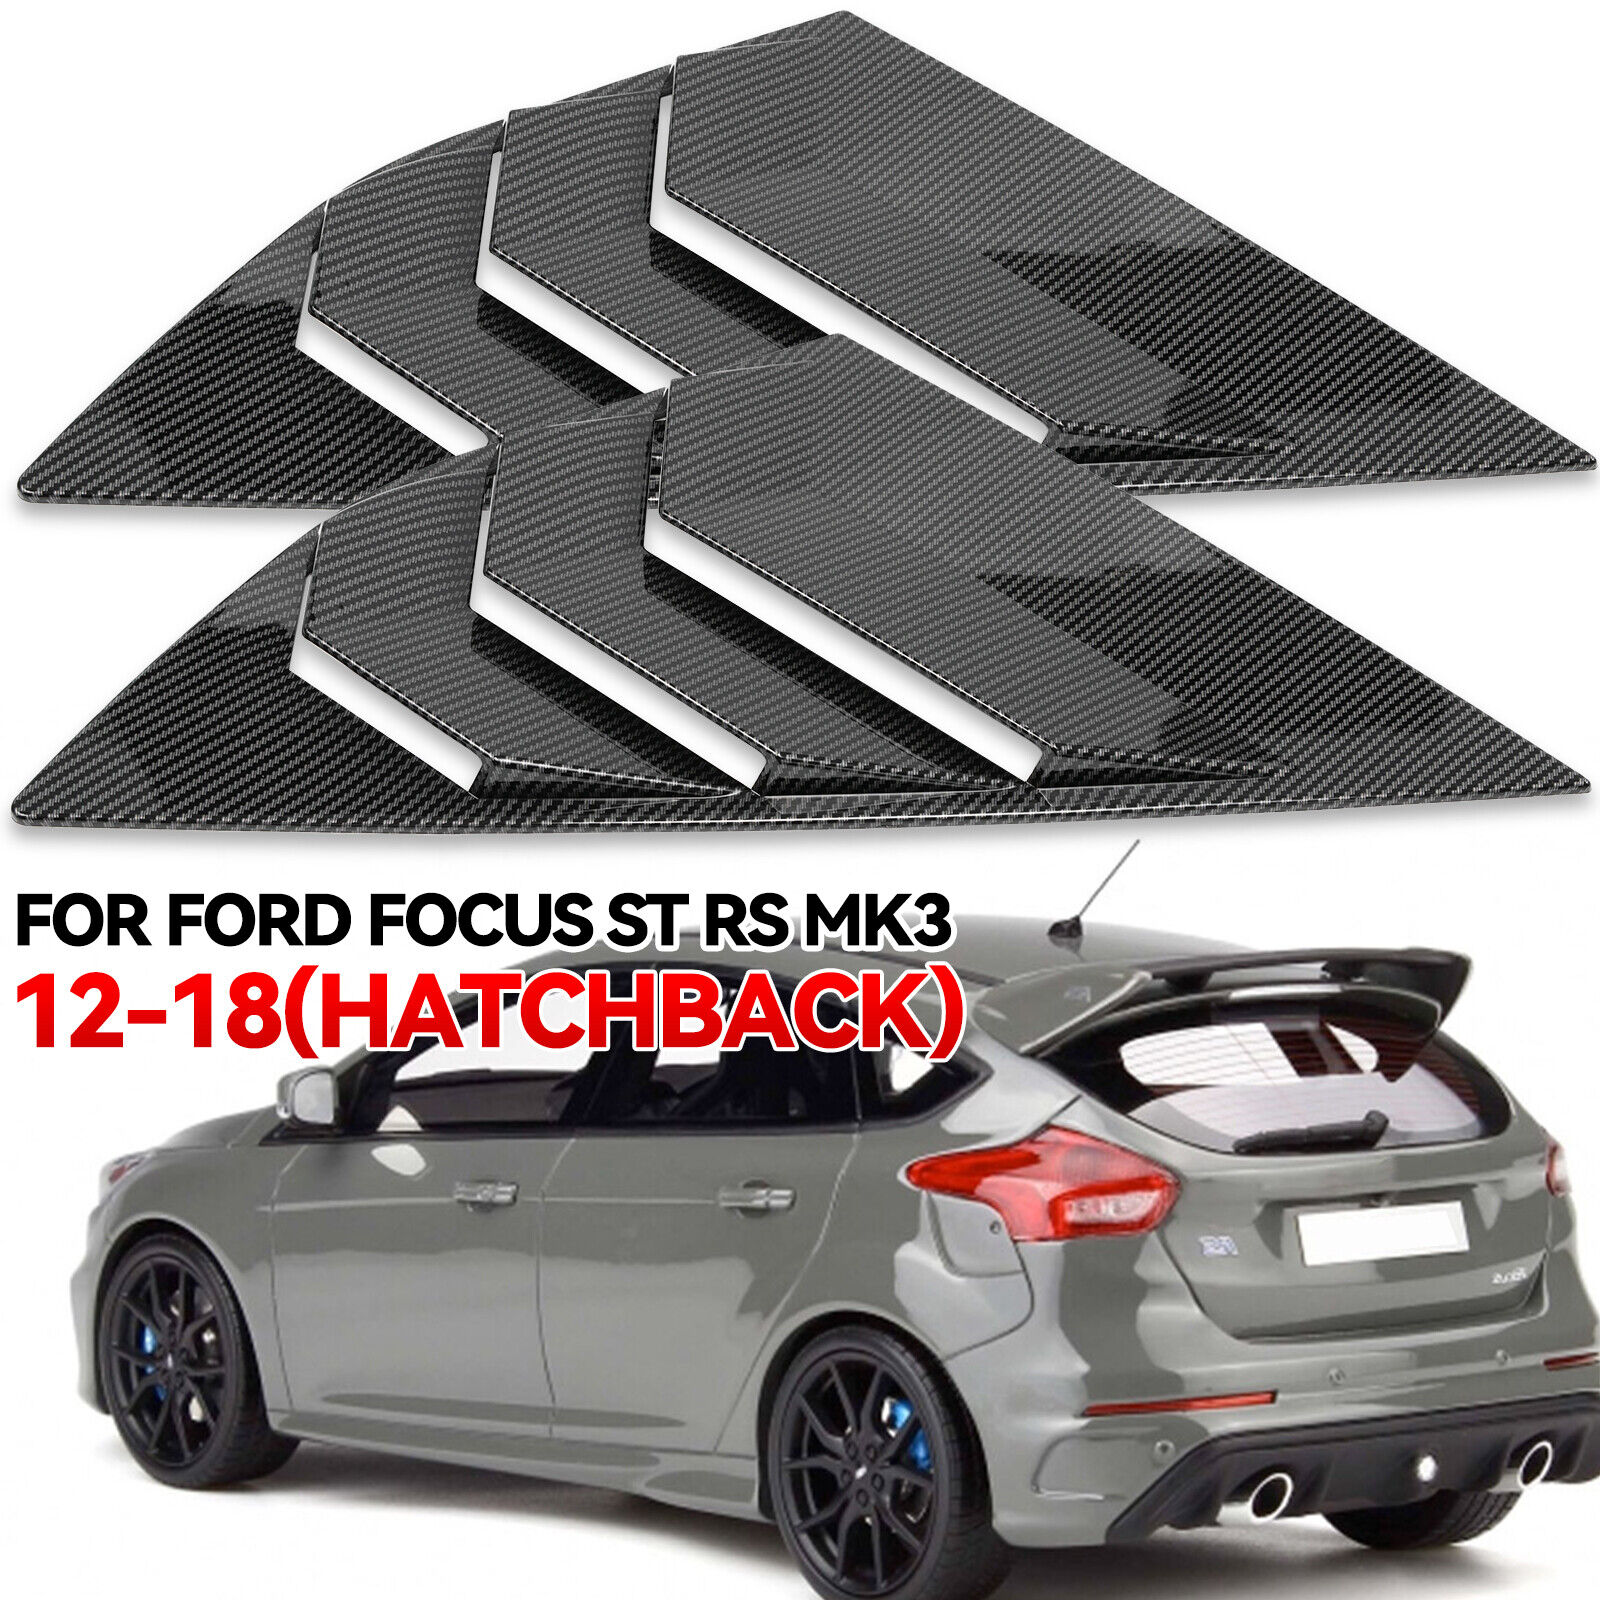 Window Louver Rear Vent Cover Carbon Fiber For Ford Focus ST RS III Hatchback